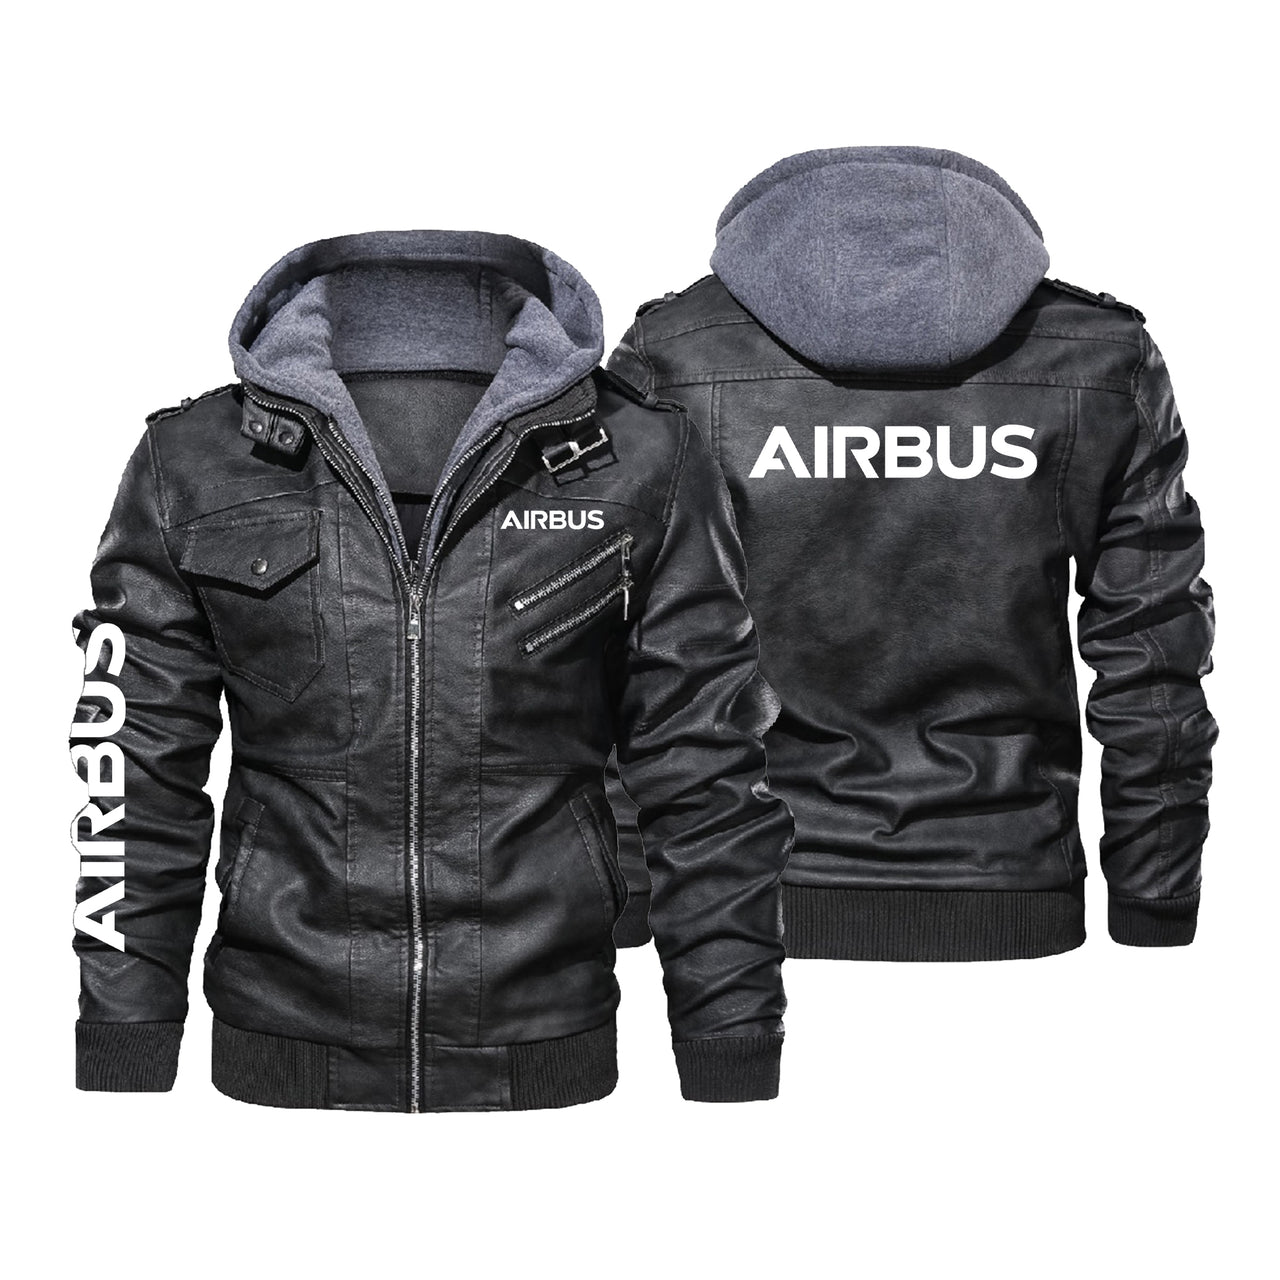 Airbus & Text Designed Hooded Leather Jackets